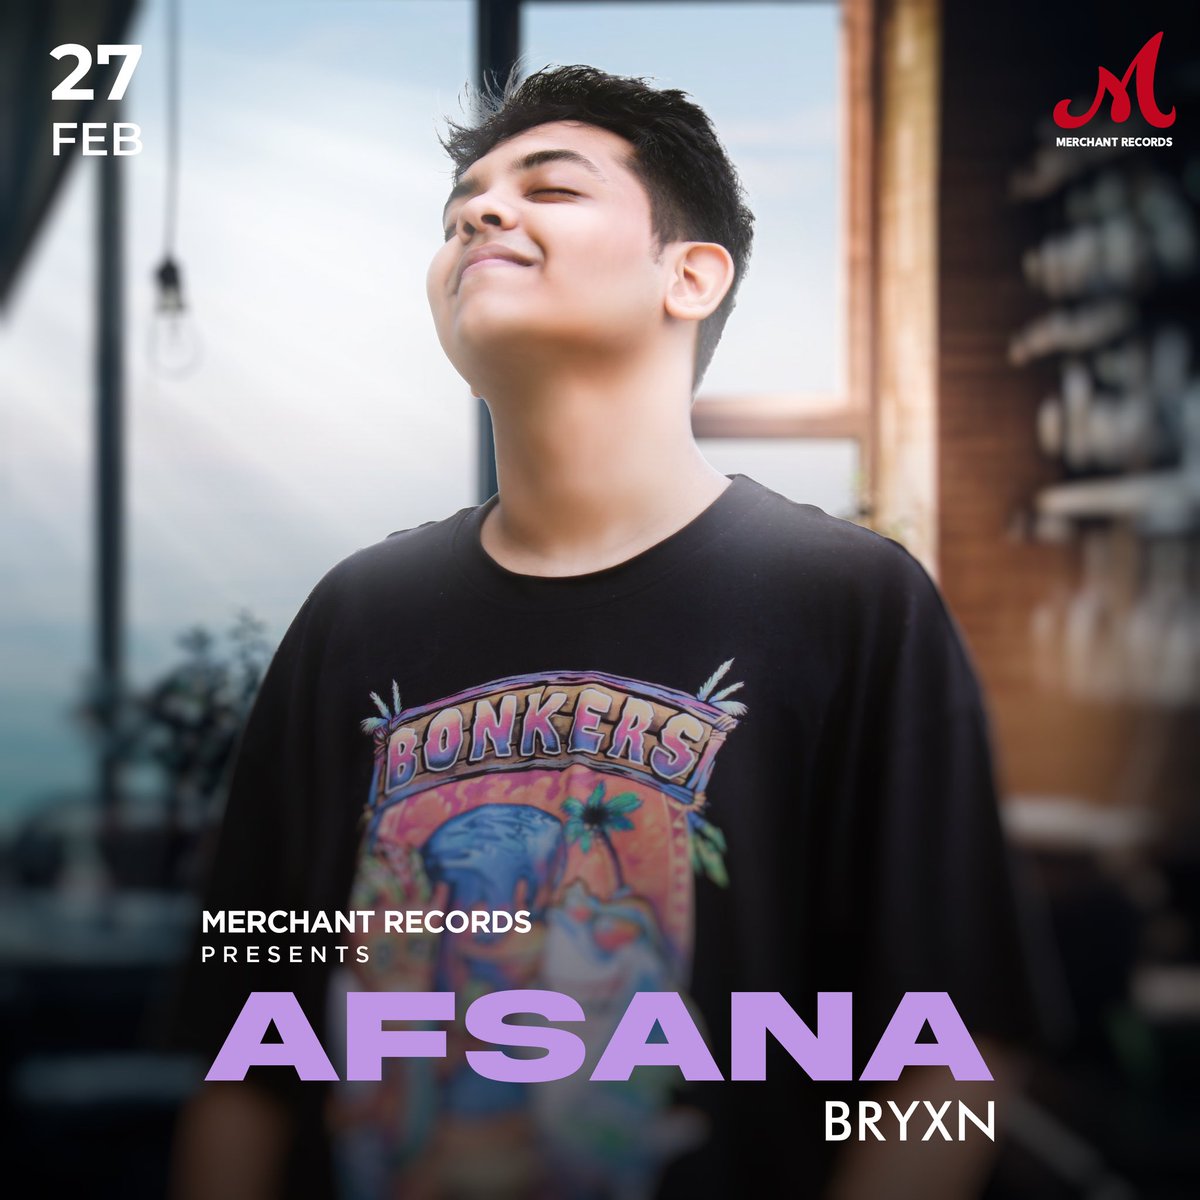 Get ready for a captivating journey with #Afsana by @bryan, dropping Feb 27 on our YouTube channel. Tune in for musical magic! 🎶 #NewRelease #MerchantRecords #SalimSulaiman